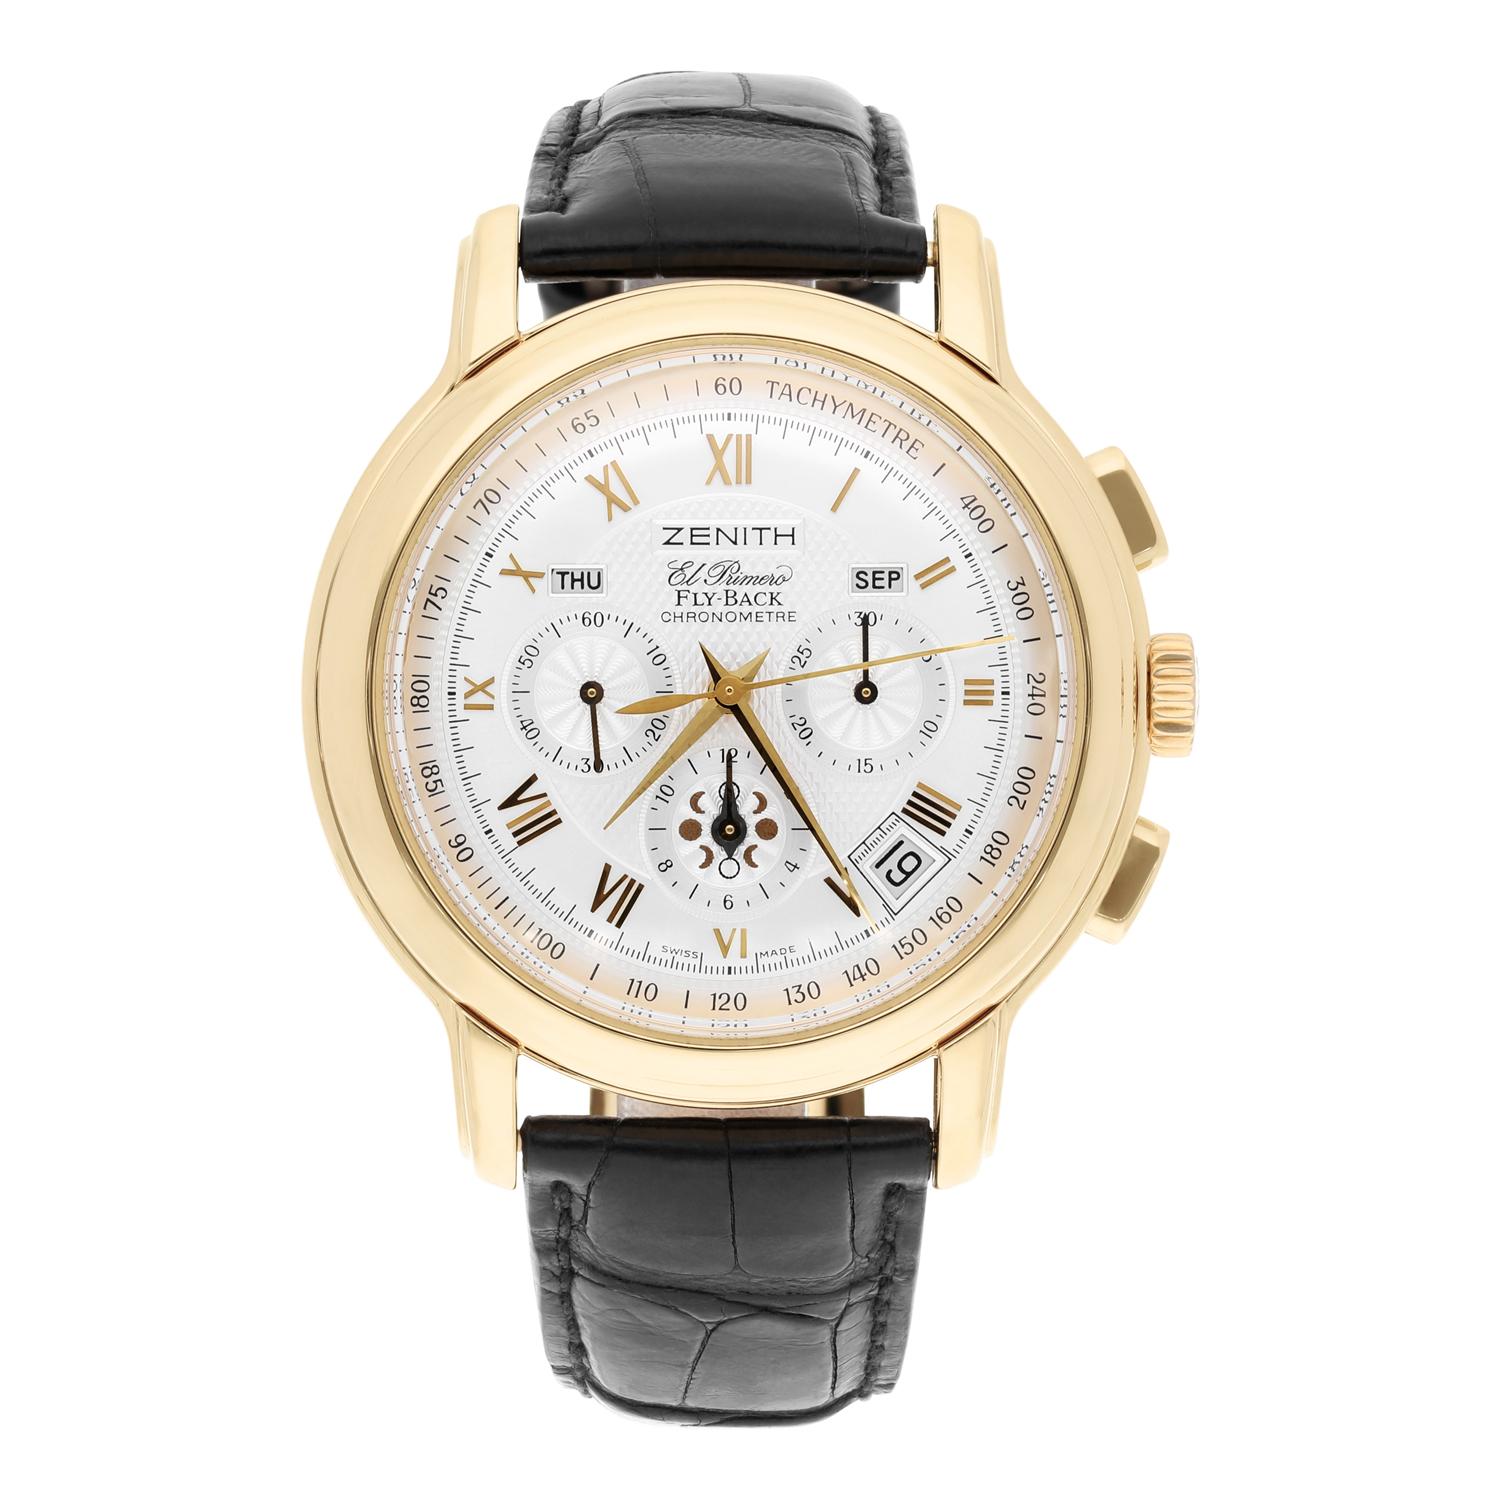 This luxurious Zenith El Primero wristwatch is a true statement piece for any stylish man. With a round 43mm yellow gold case, and a black leather band, this watch exudes classic style. The silver dial features Roman numerals and a guilloche